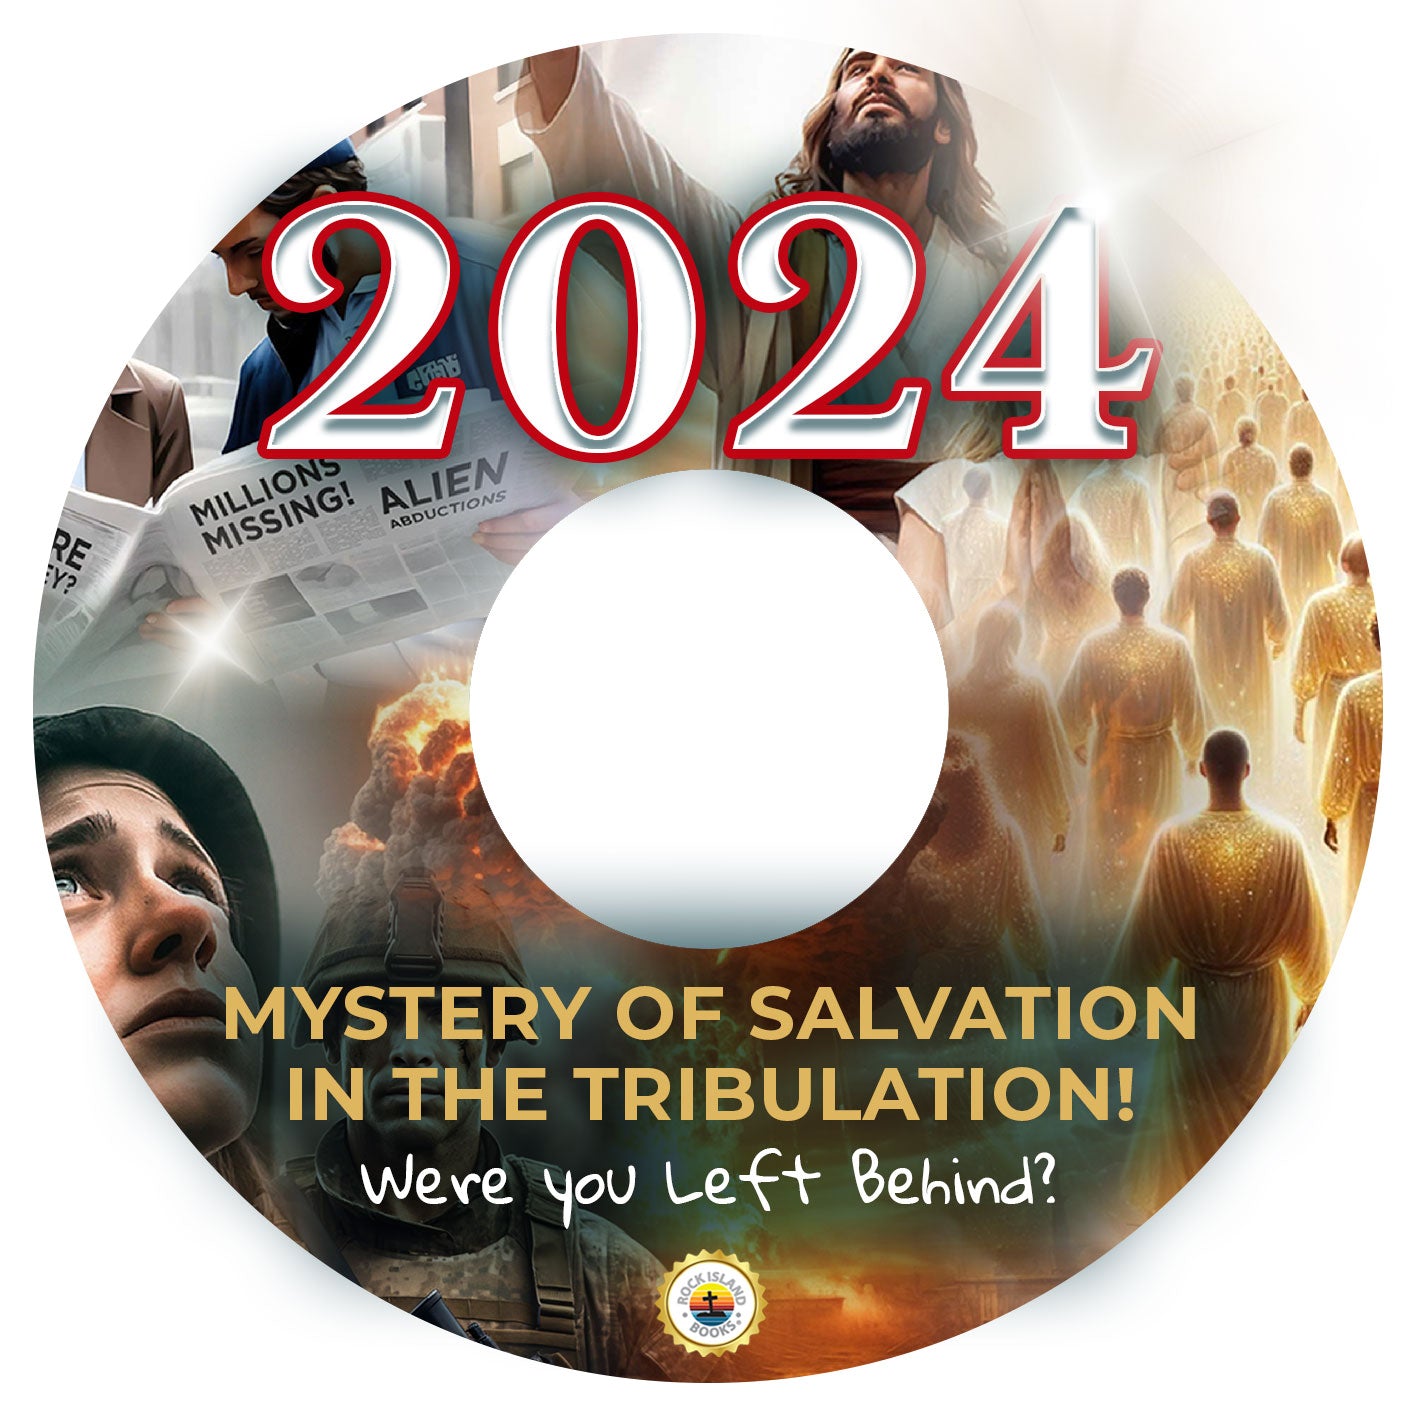 2024: Mystery of Salvation in the Tribulation DVD - Were you left behind?